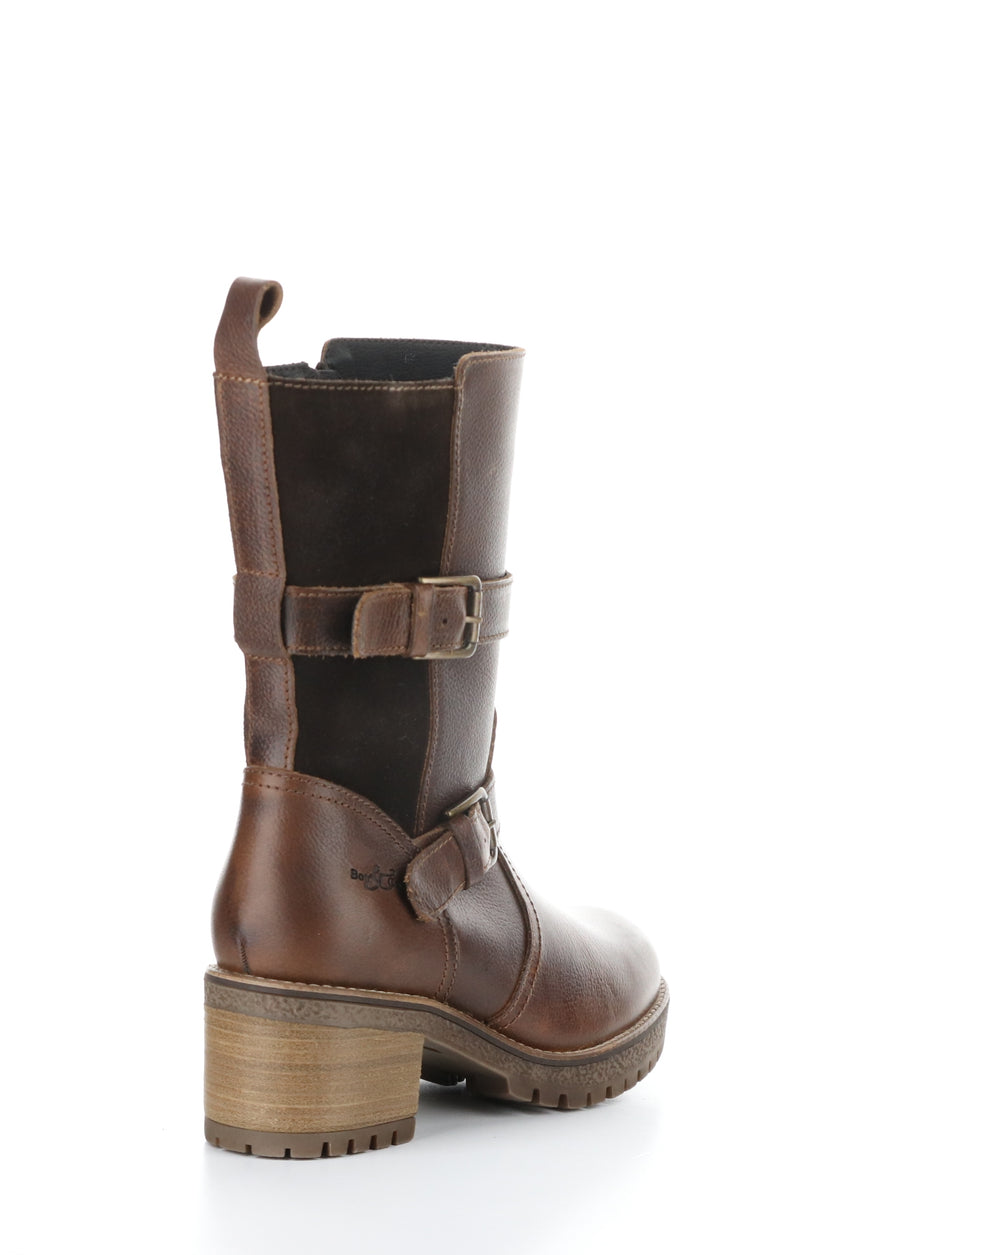 MAISE BRANDY/COFFEE Round Toe Boots